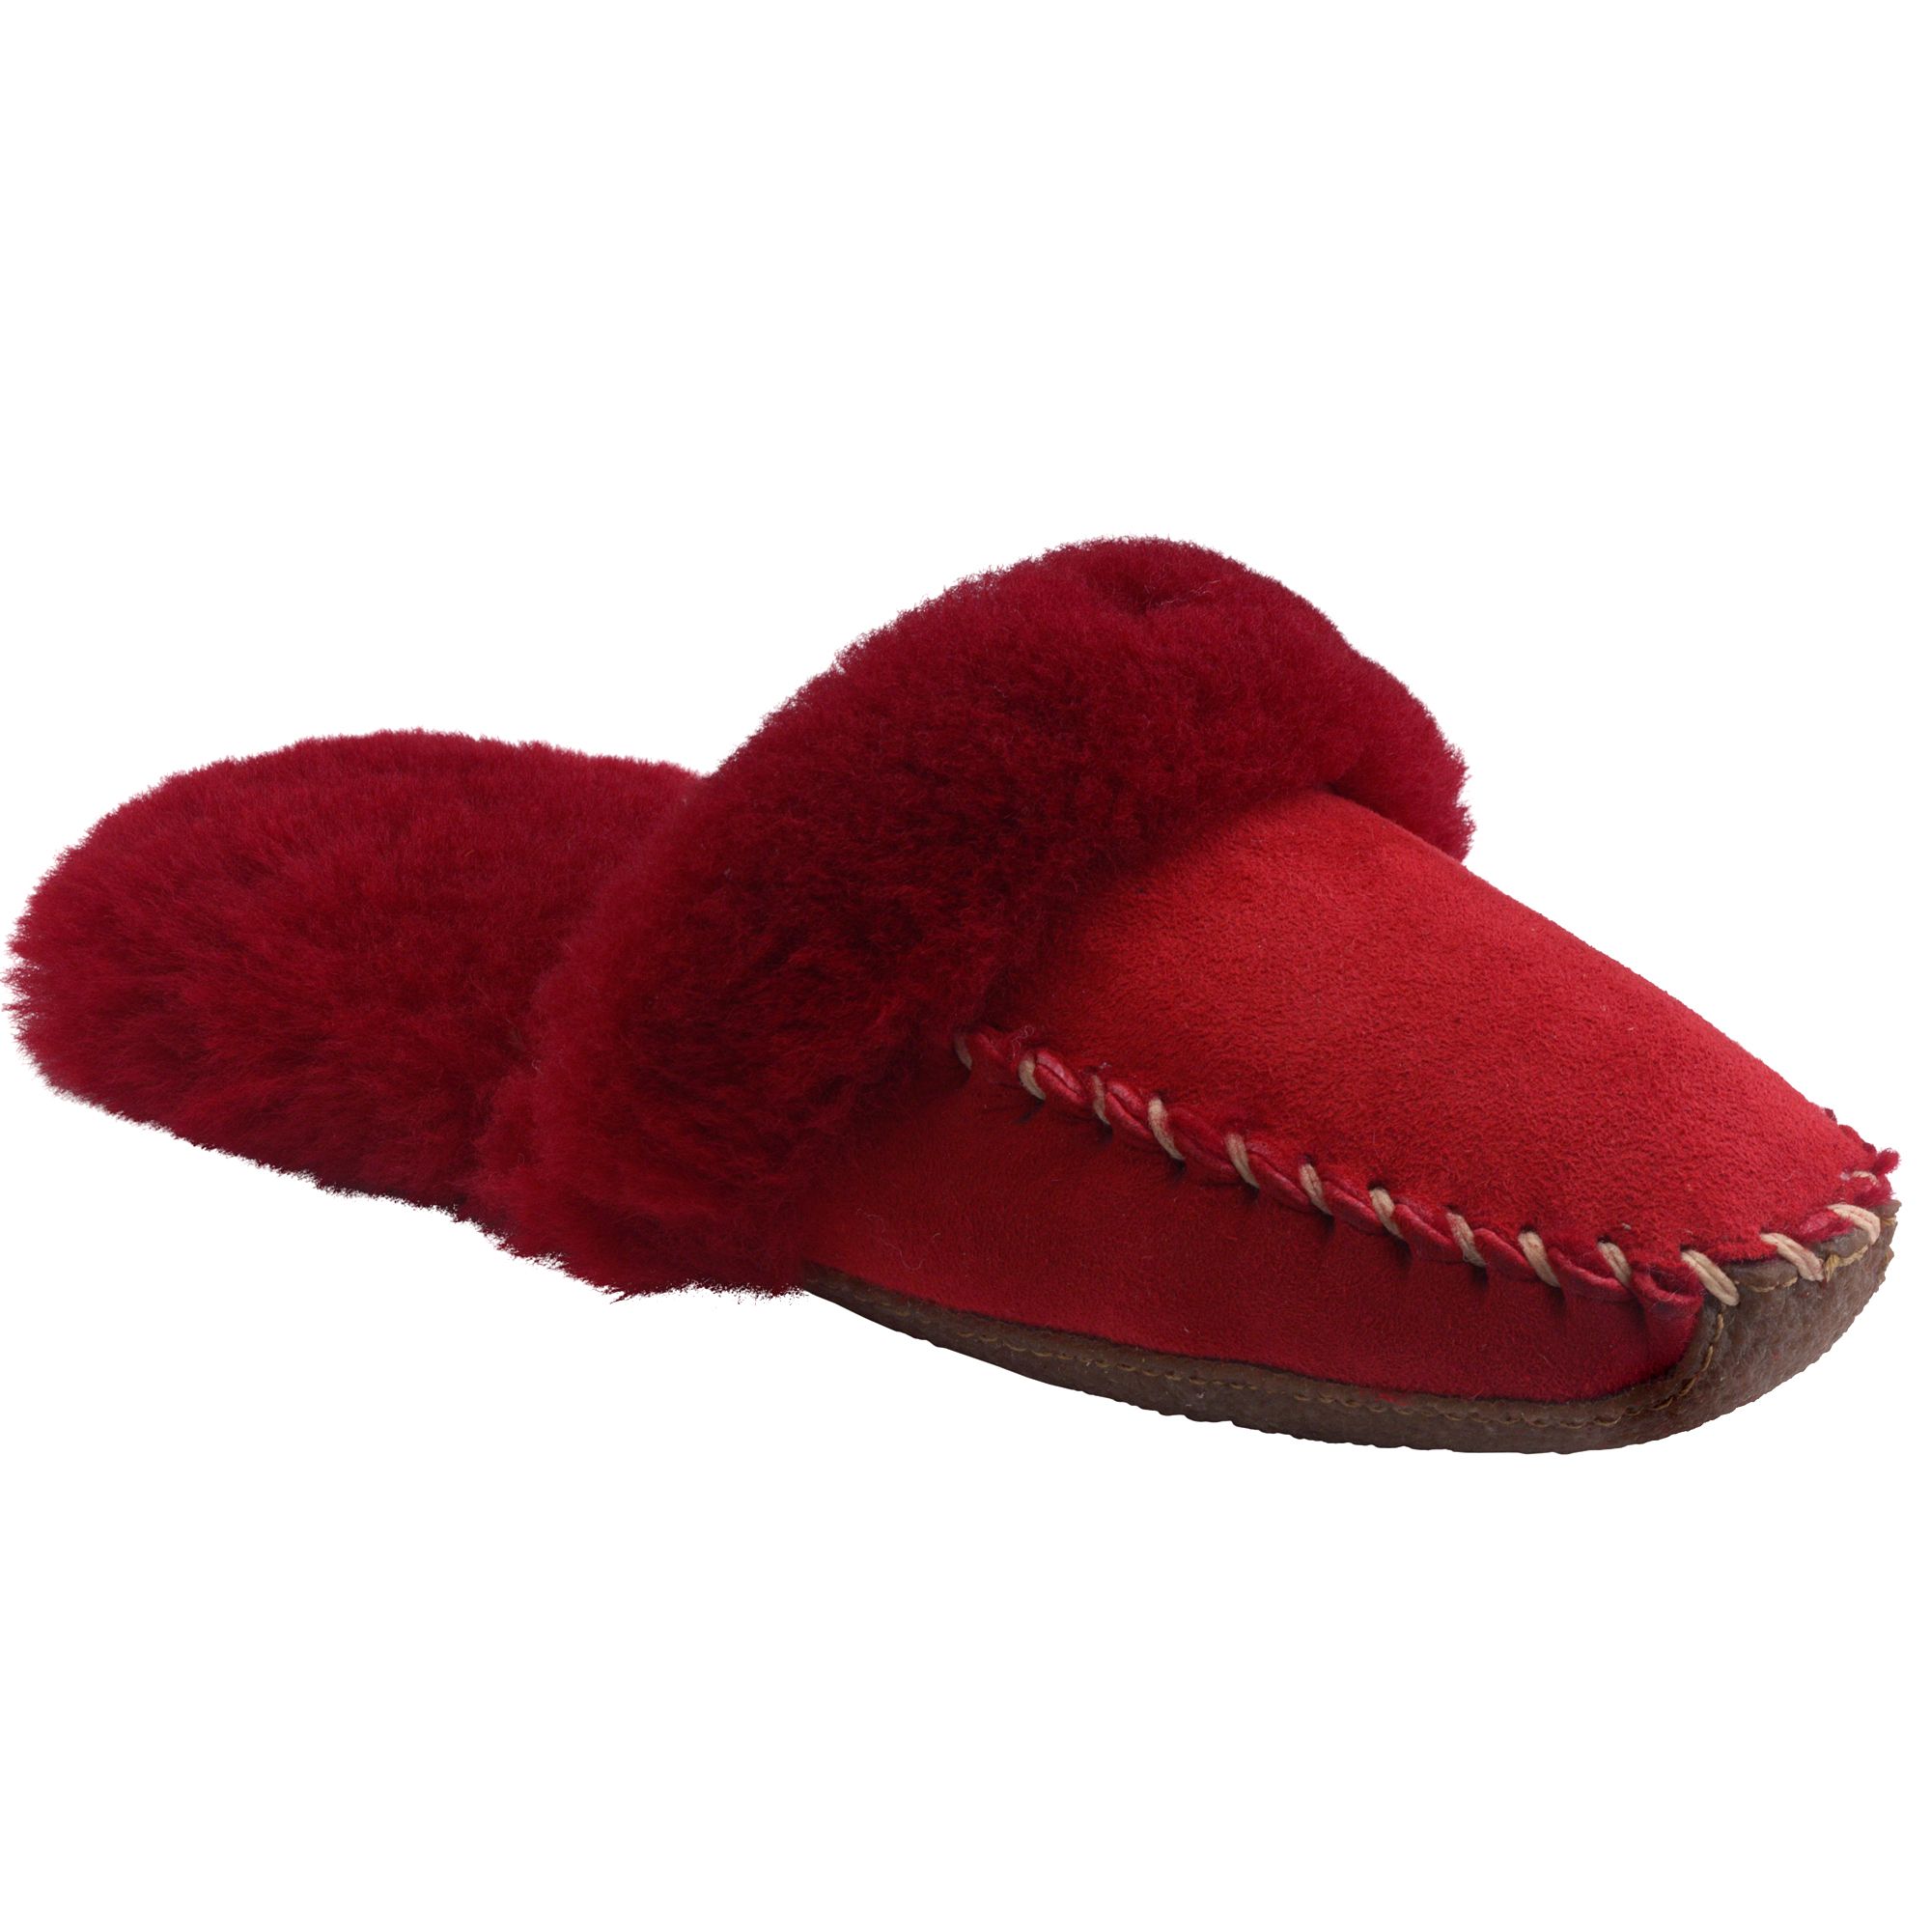 Lands' End Womens Shearling Mule Slippers